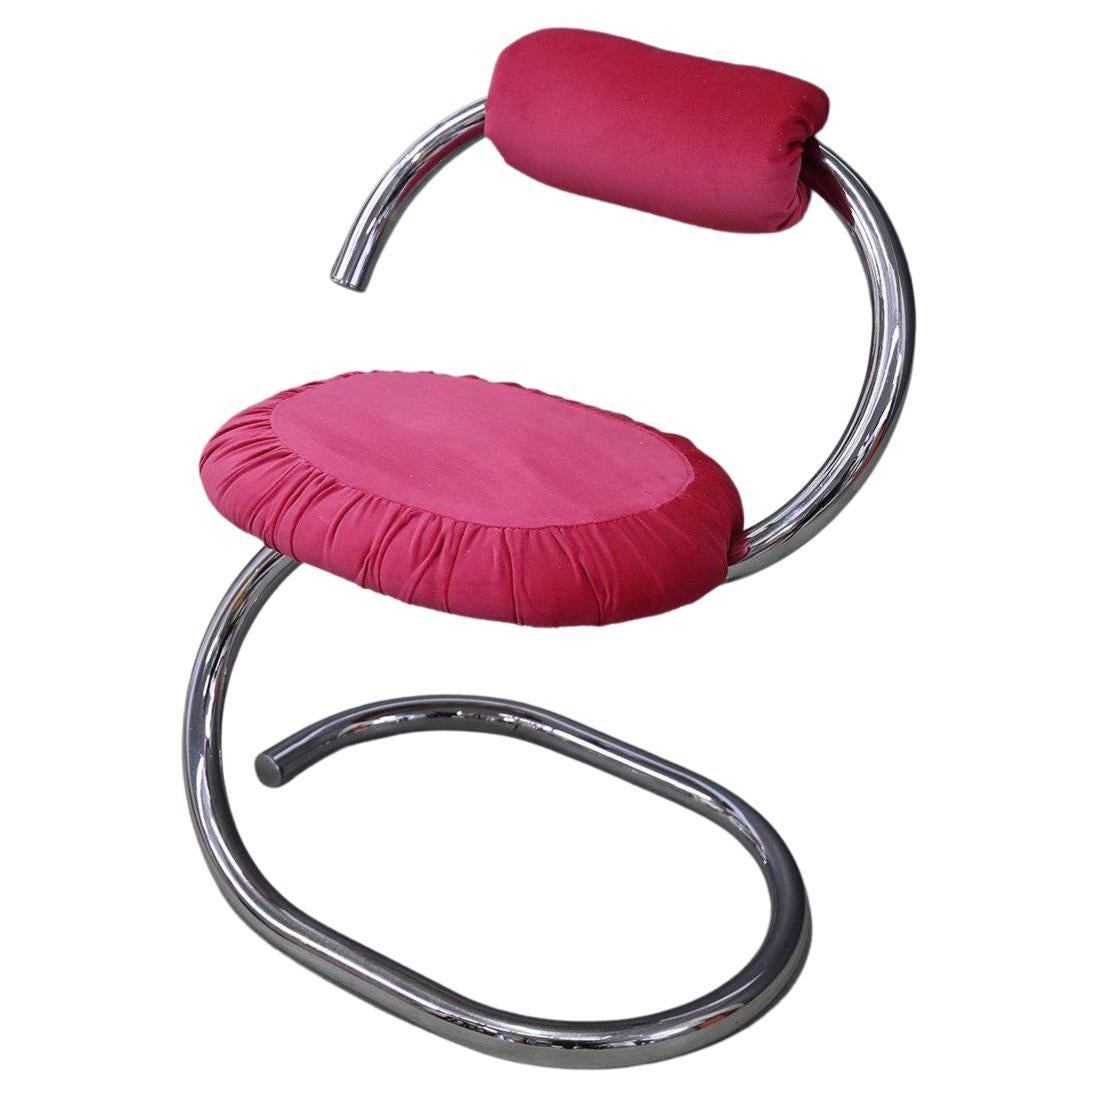 Giotto Stoppino, Cobra / Spirale Chairs For Sale